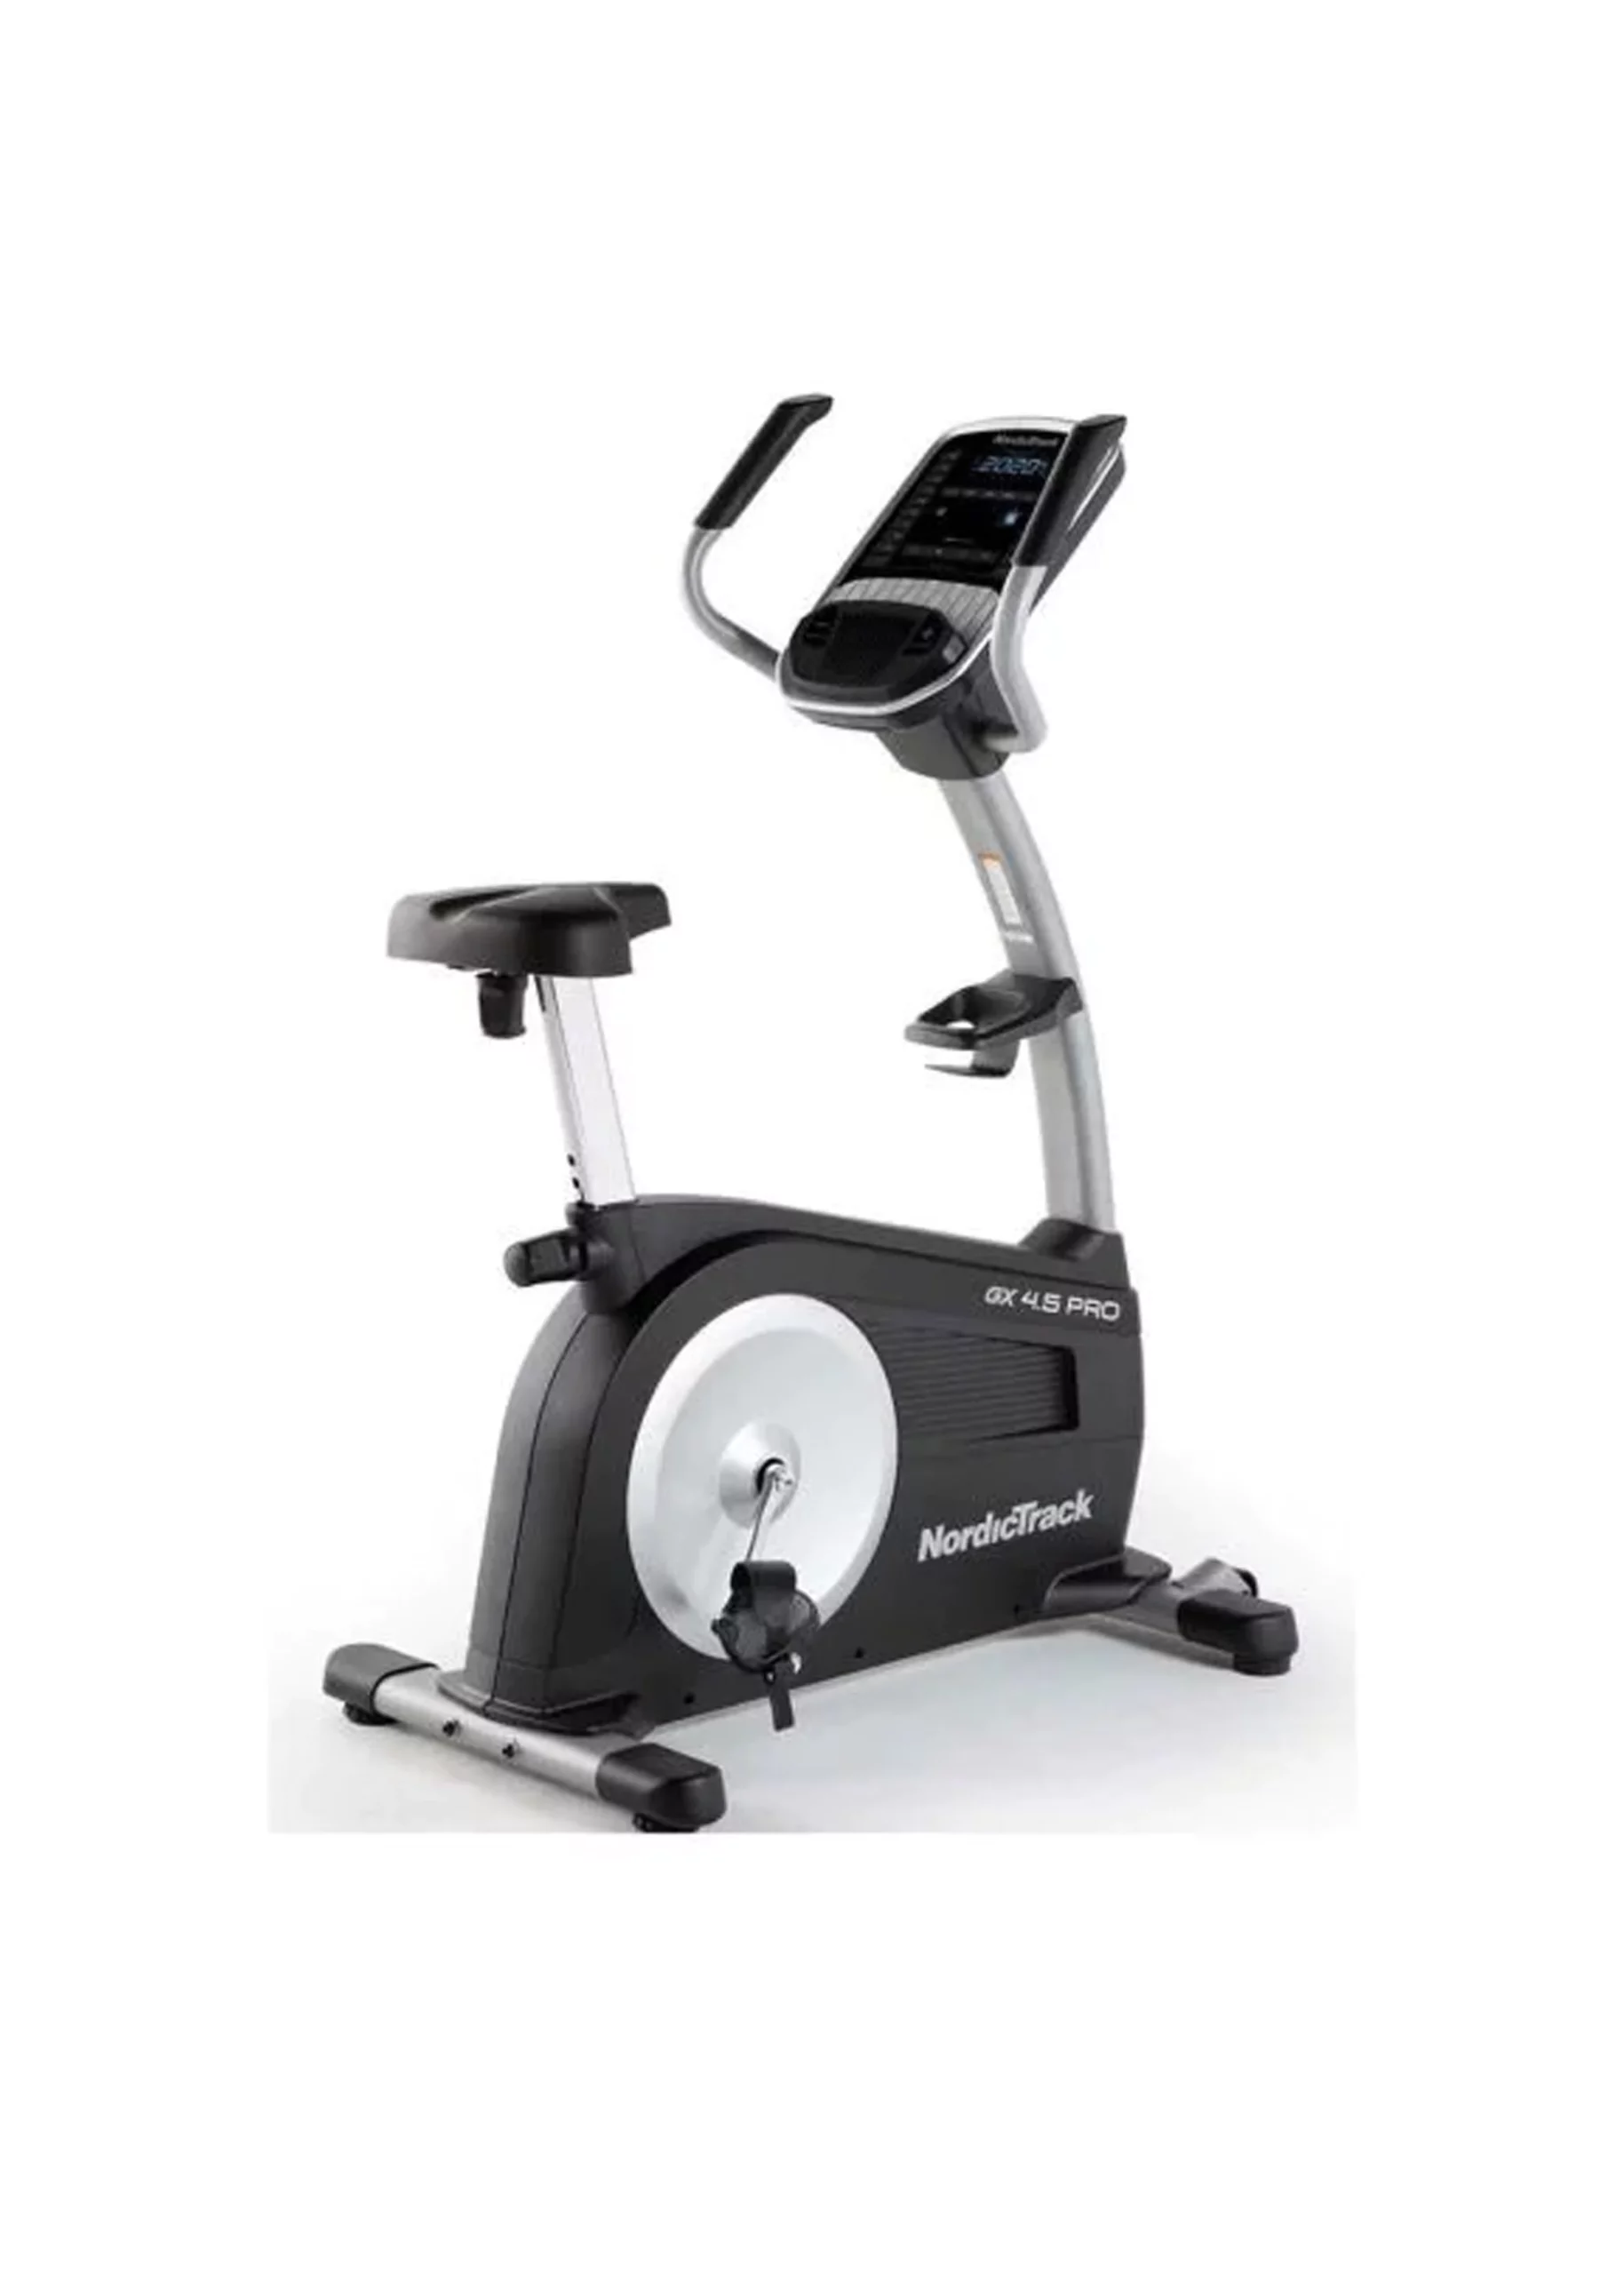 NORDICTRACK GX 4.5 PRO EXERCYCLE